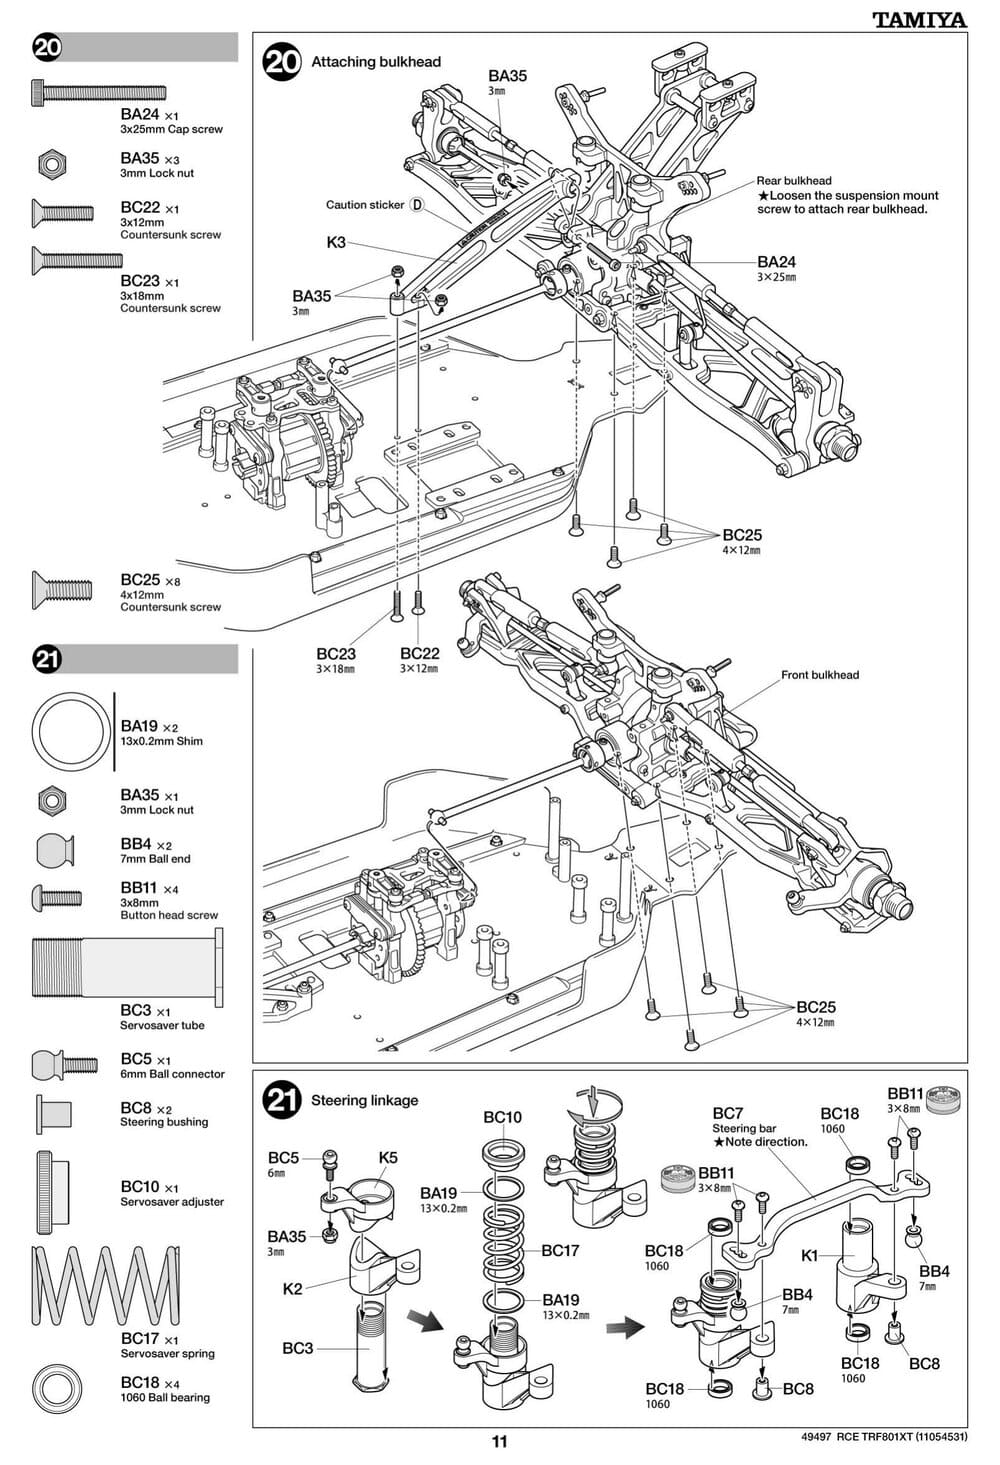 Tamiya - TRF801Xt Performance Package Version Chassis - Manual - Page 11